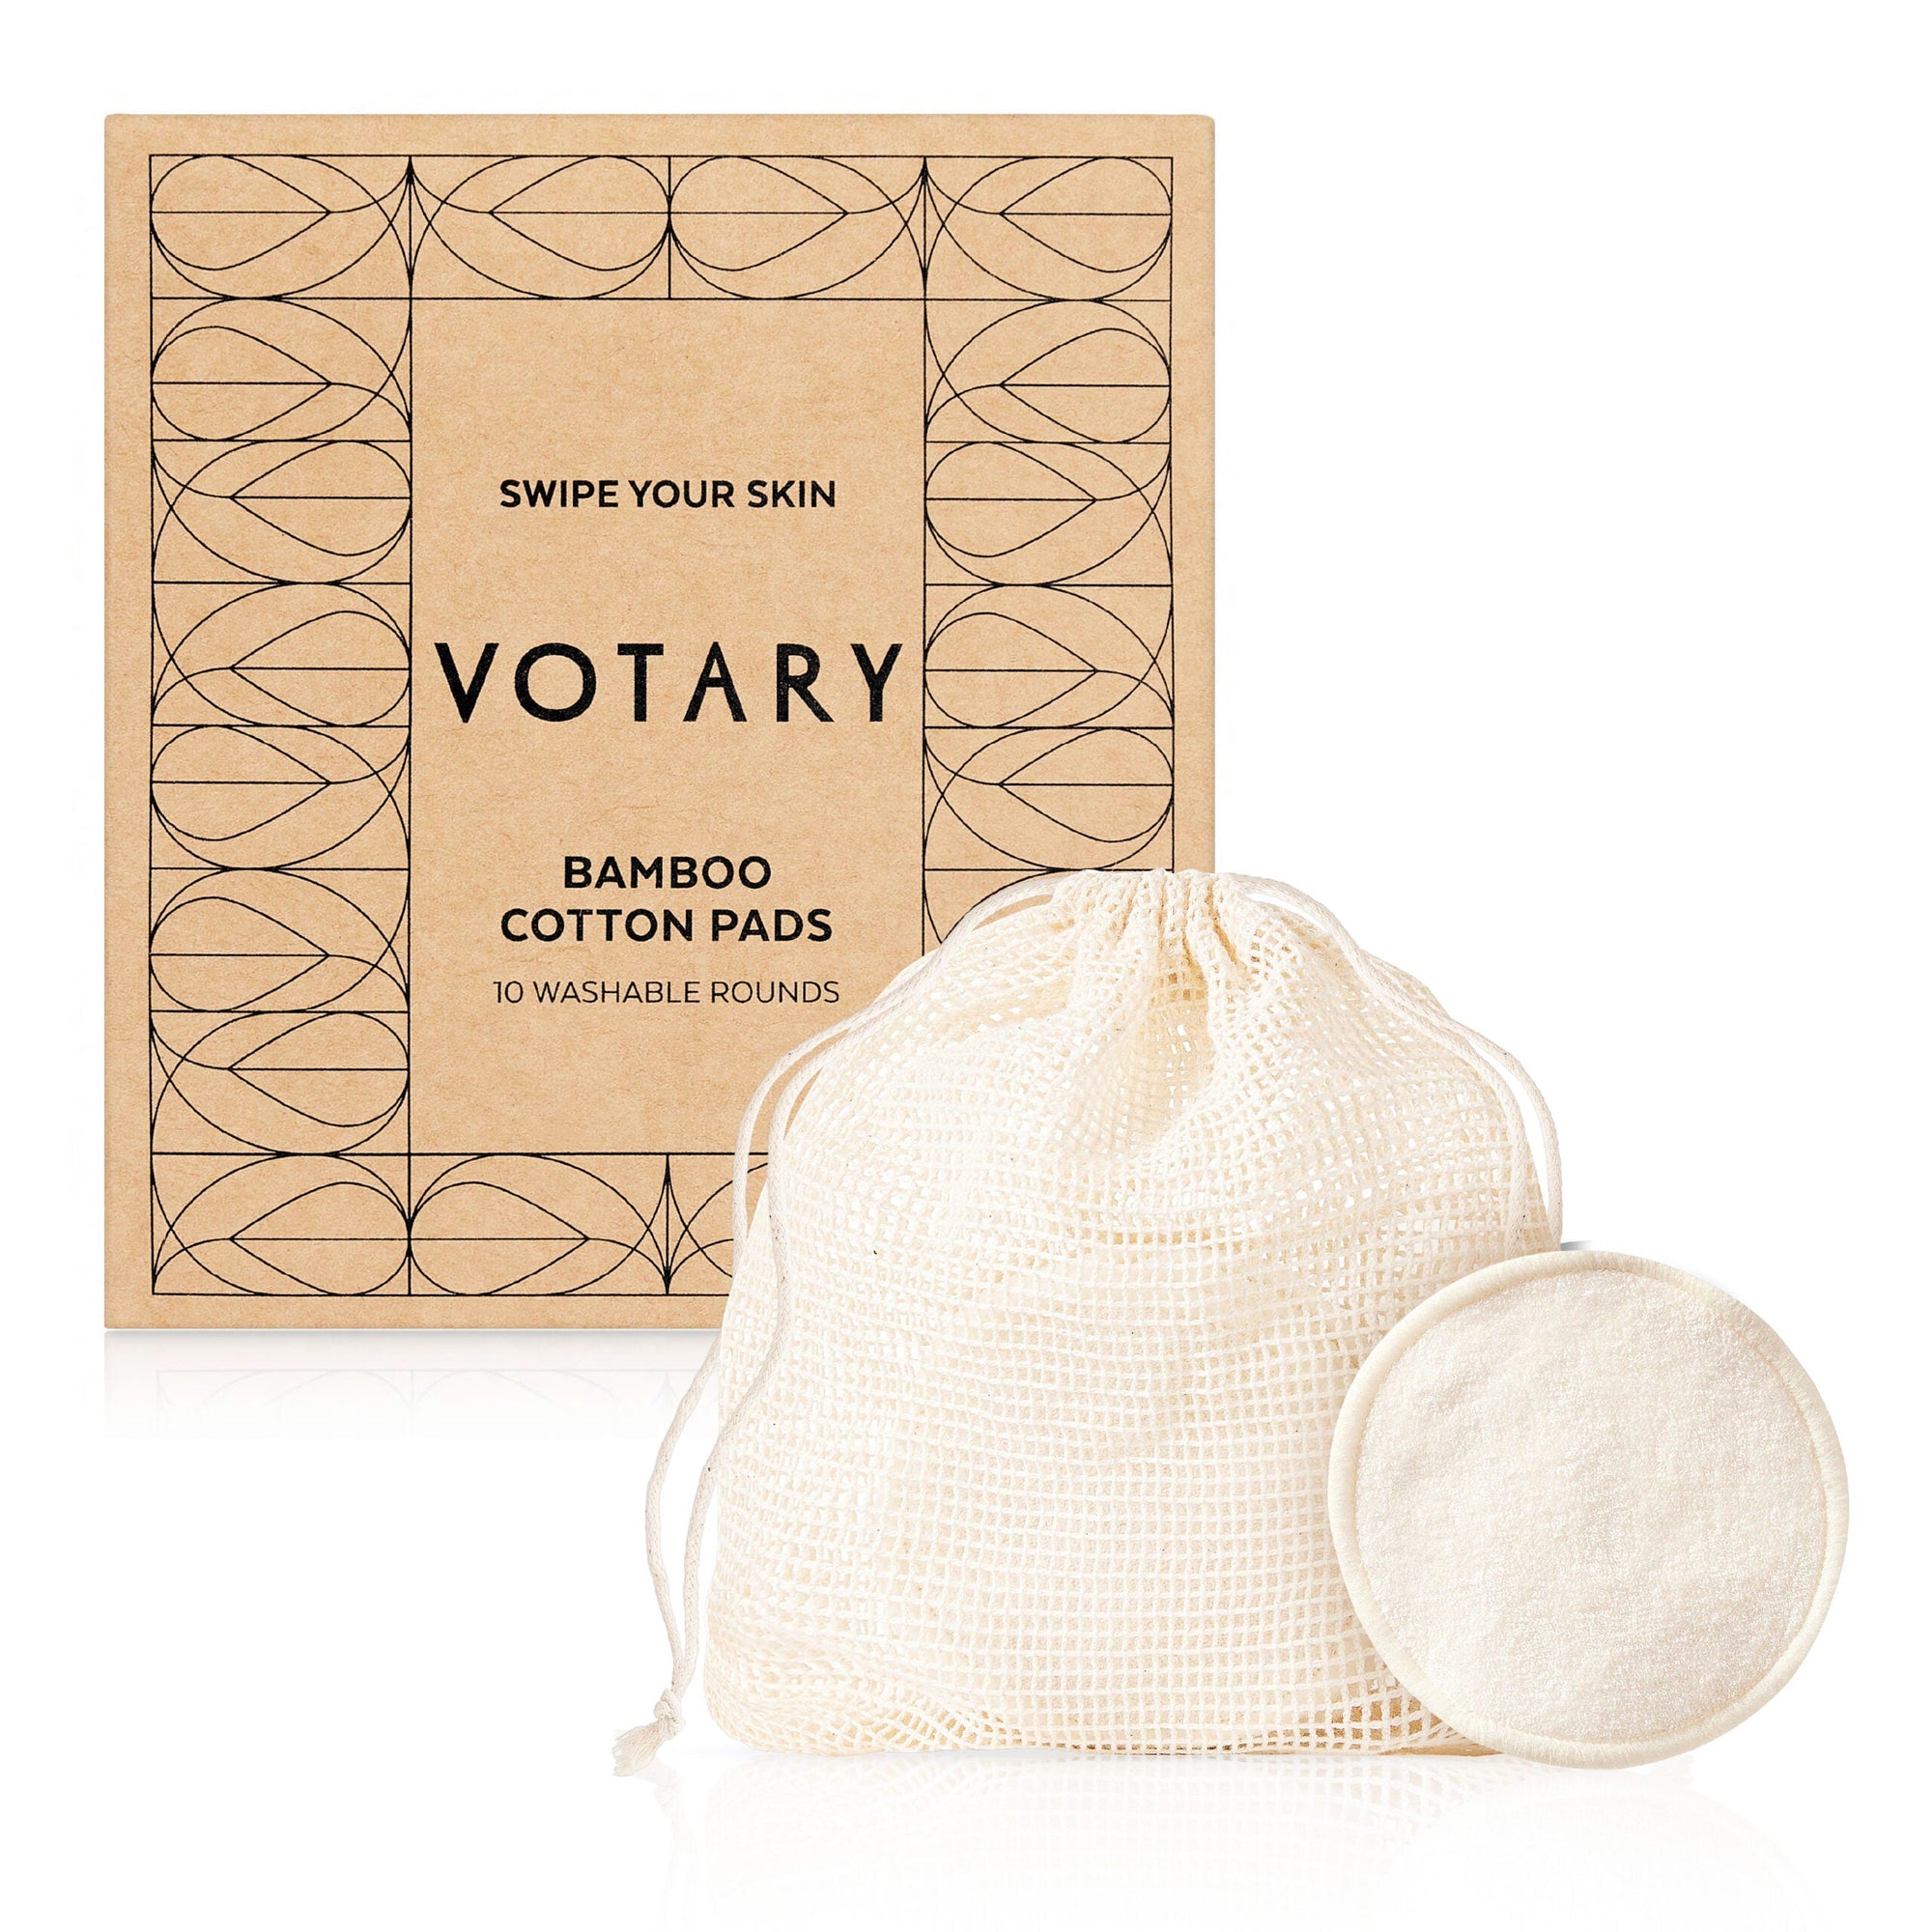 Bamboo Cotton Pads - 10 Washable Rounds